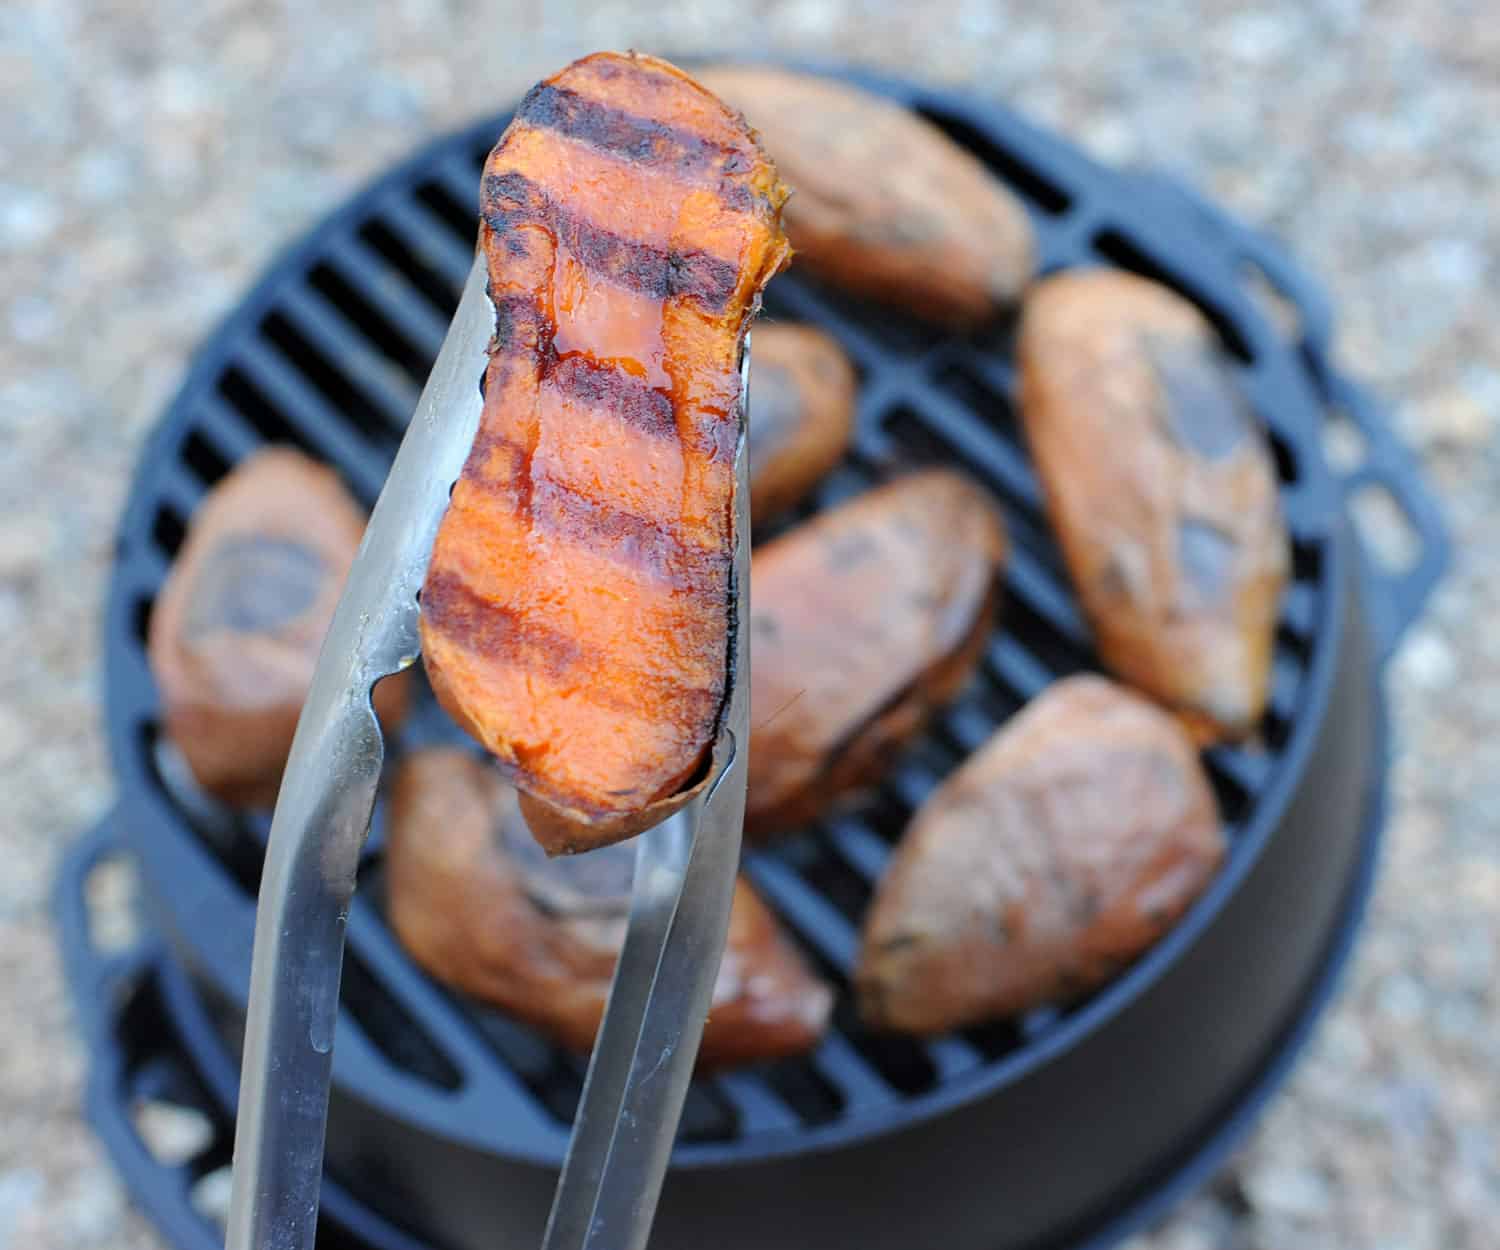 tongs holding sweet potato half with char marks.